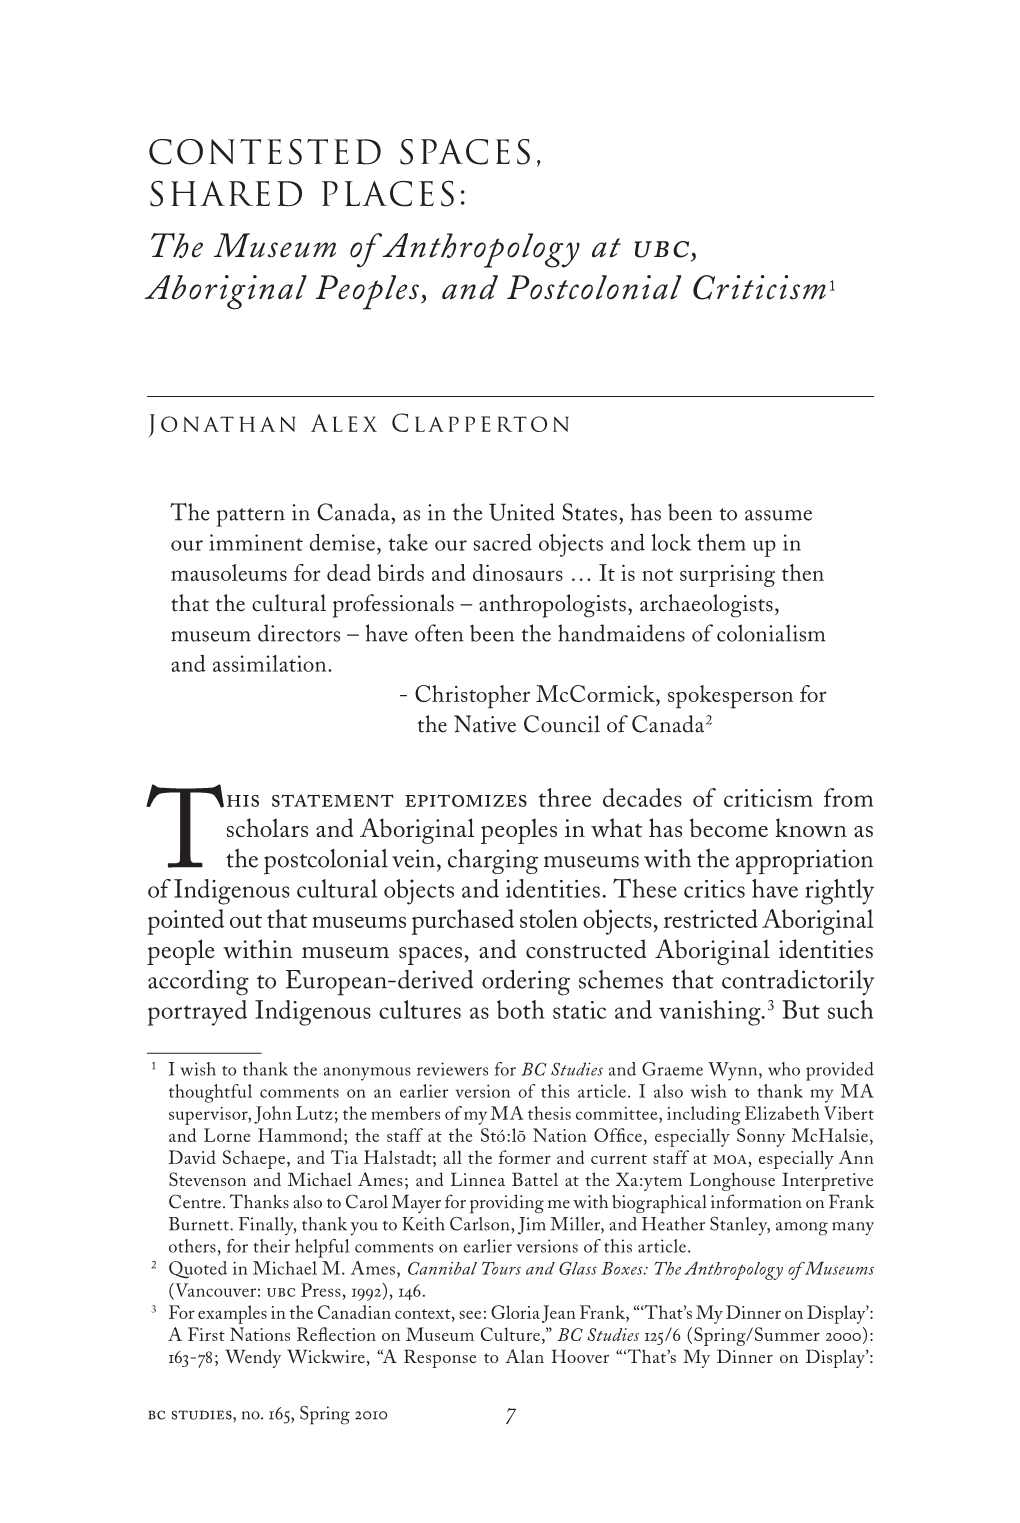 The Museum of Anthropology at Ubc, Aboriginal Peoples, and Postcolonial Criticism 1